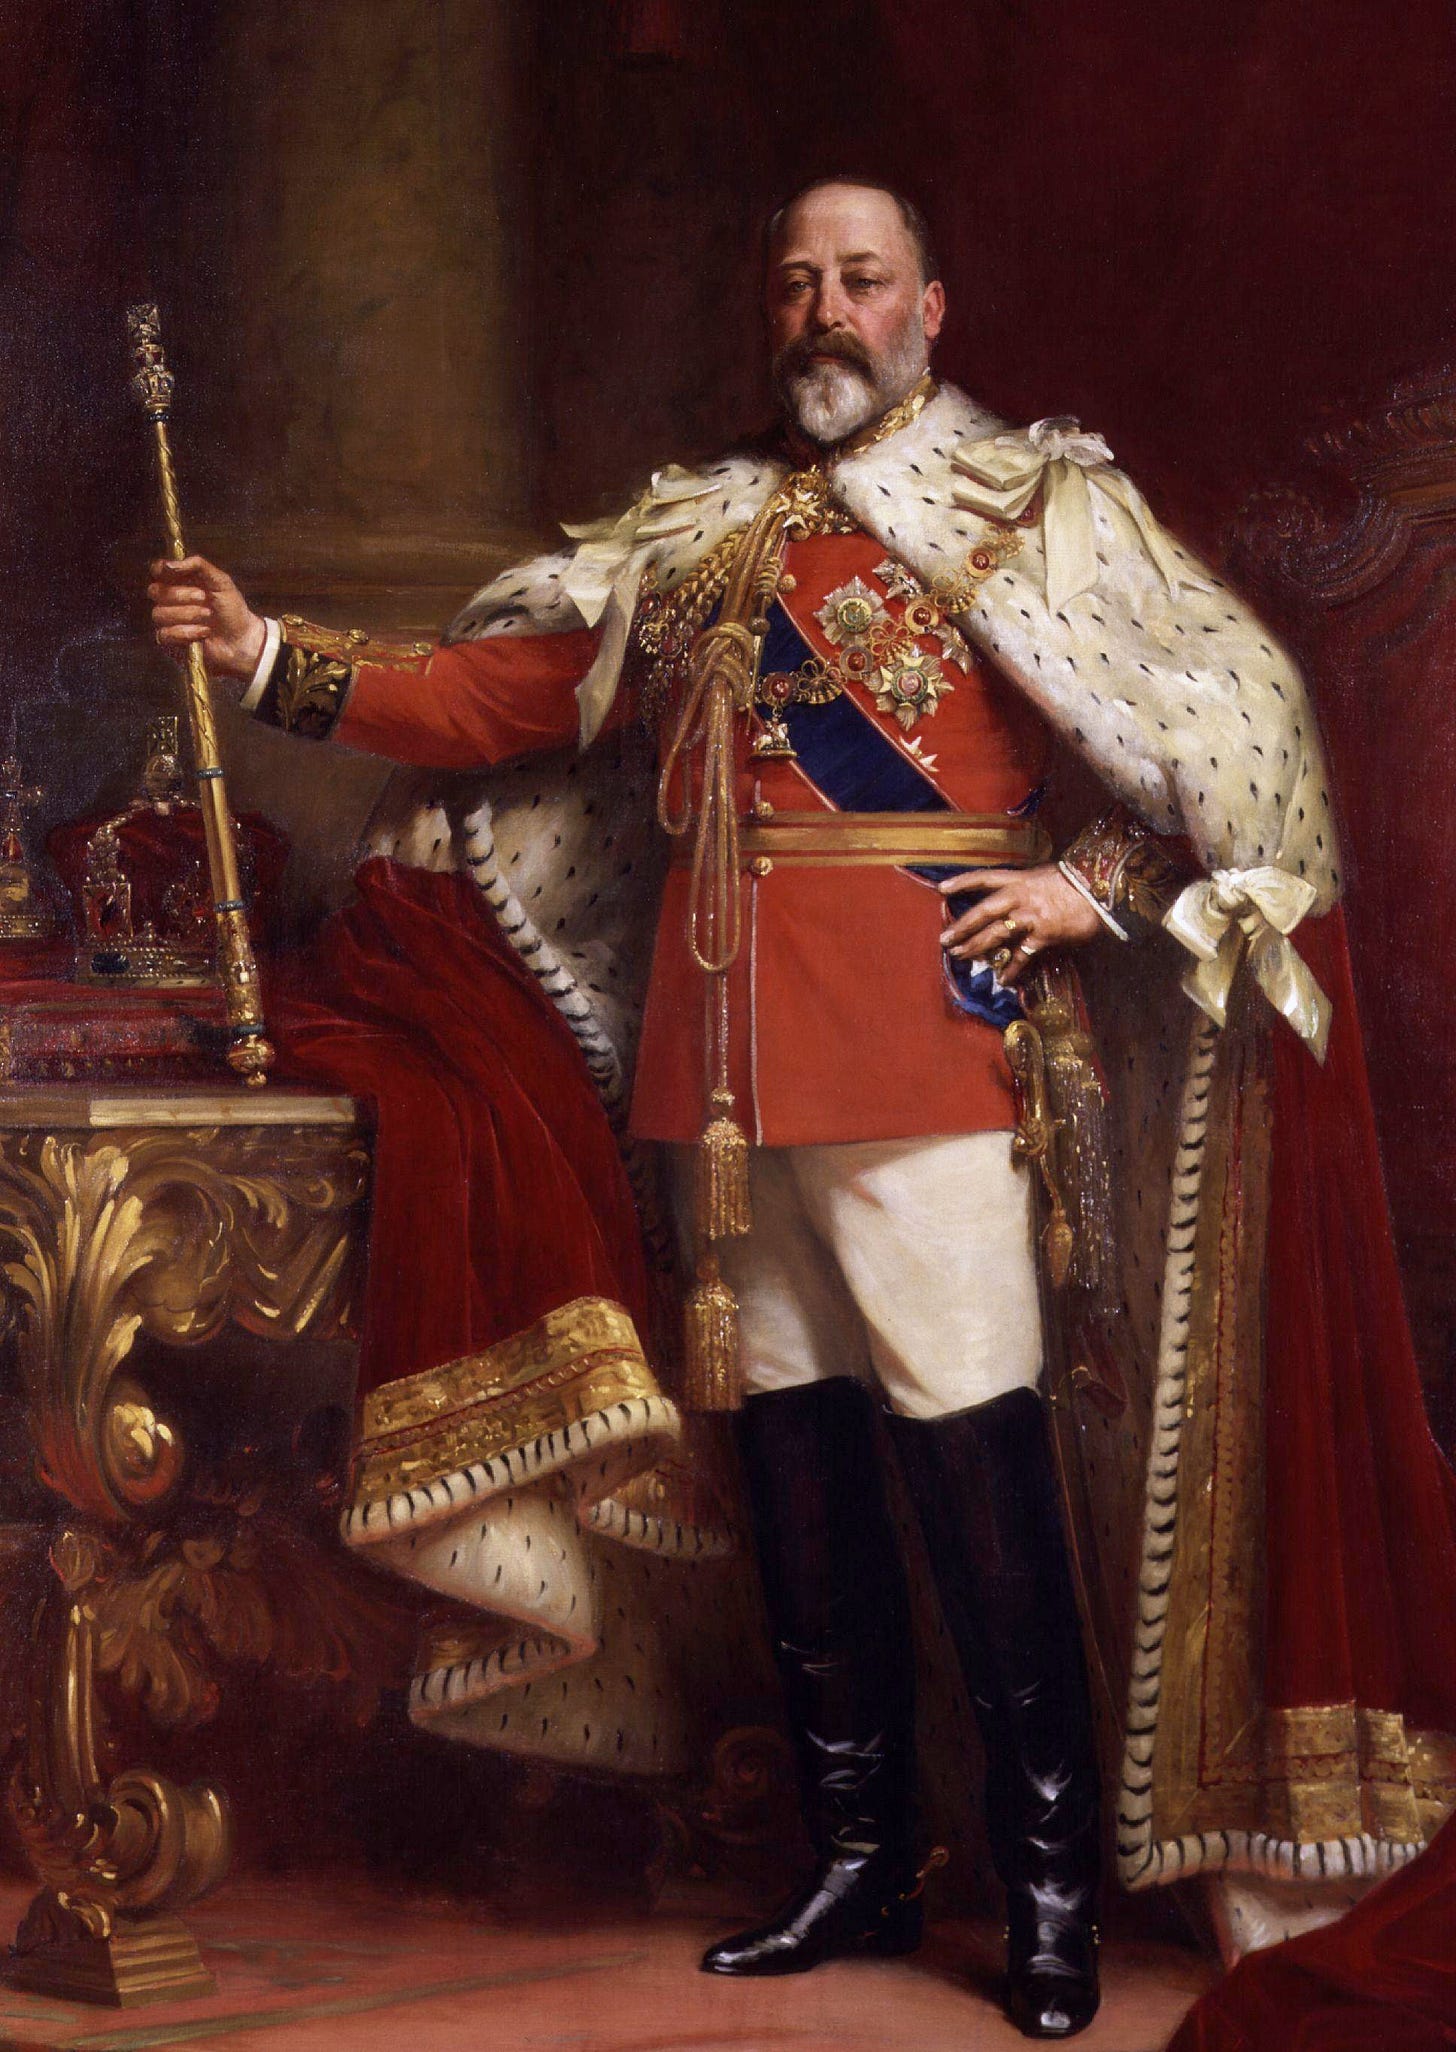 King Edward VII in his coronation robes.